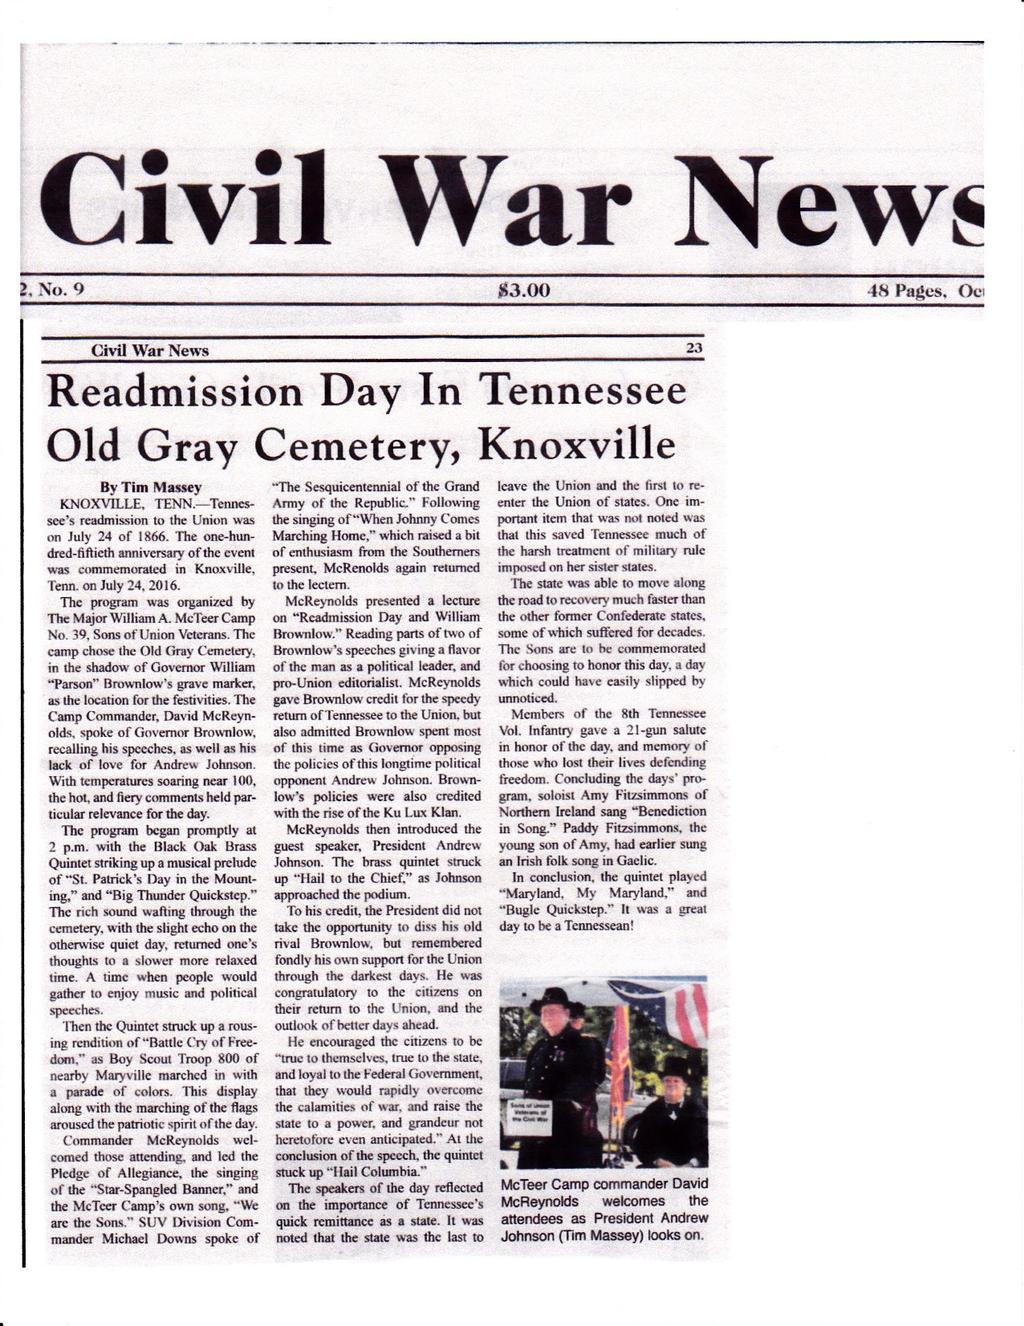 Page 4 The Camp received a 2017 Award of Distinction from the East Tennessee Historical Society for the event Readmission Day 2016.